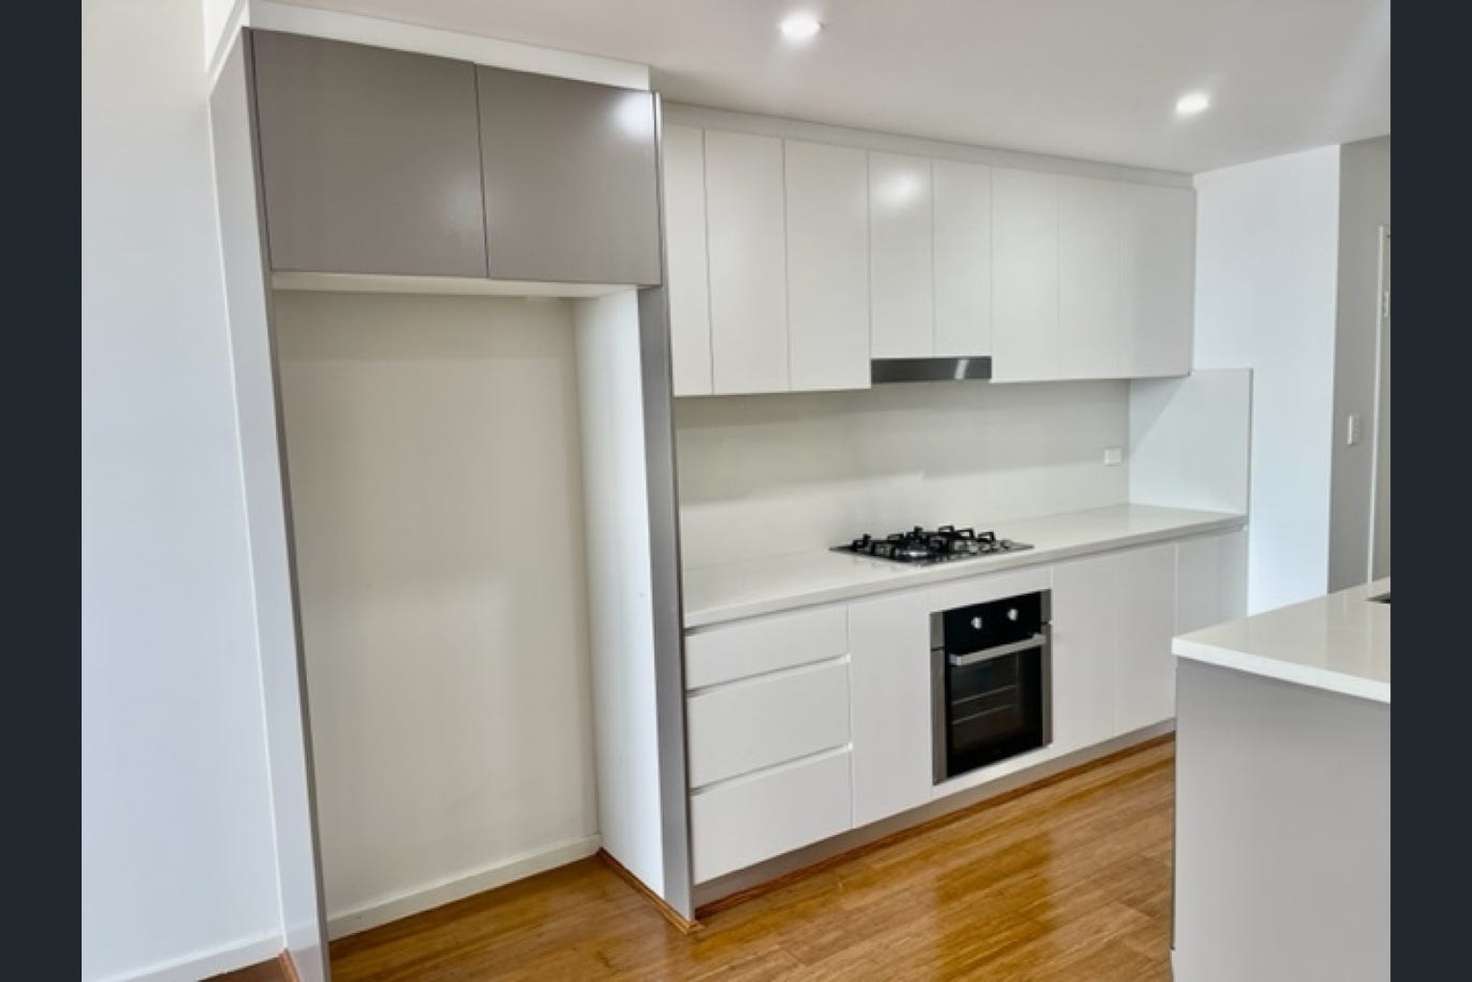 Main view of Homely apartment listing, 116/203 Birdwood Road, Georges Hall NSW 2198